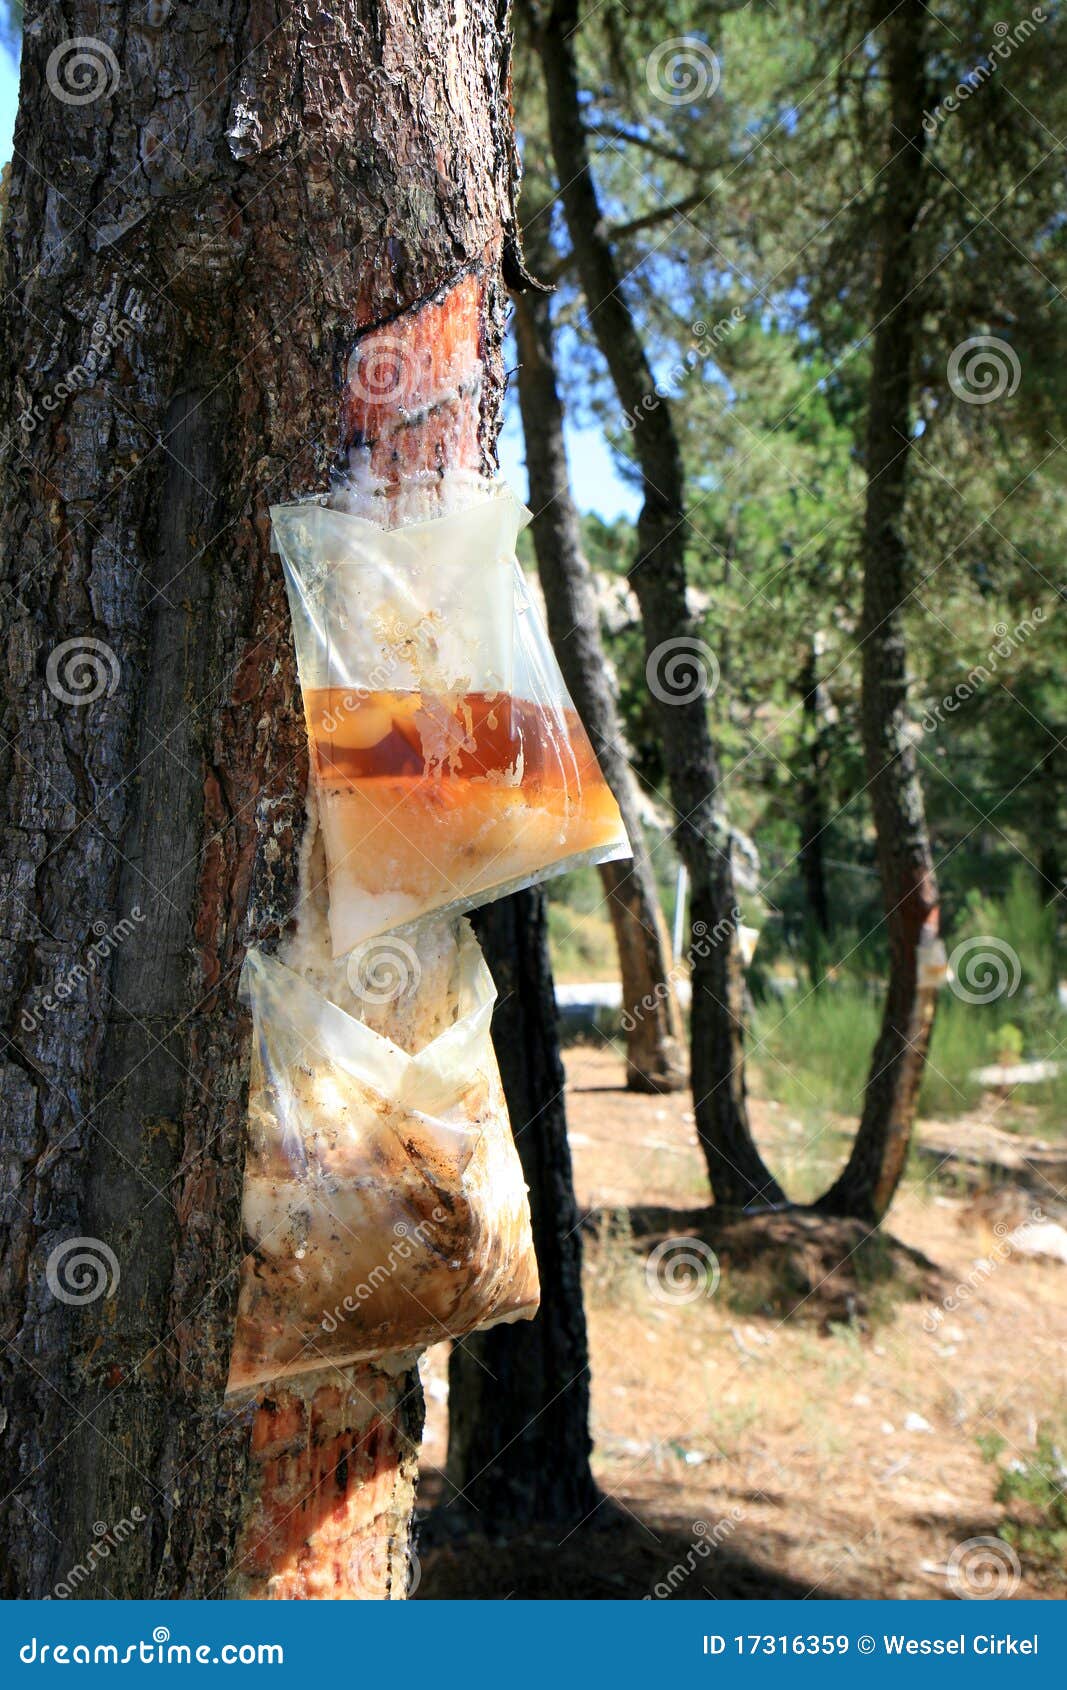 resin extraction in portuguese forest